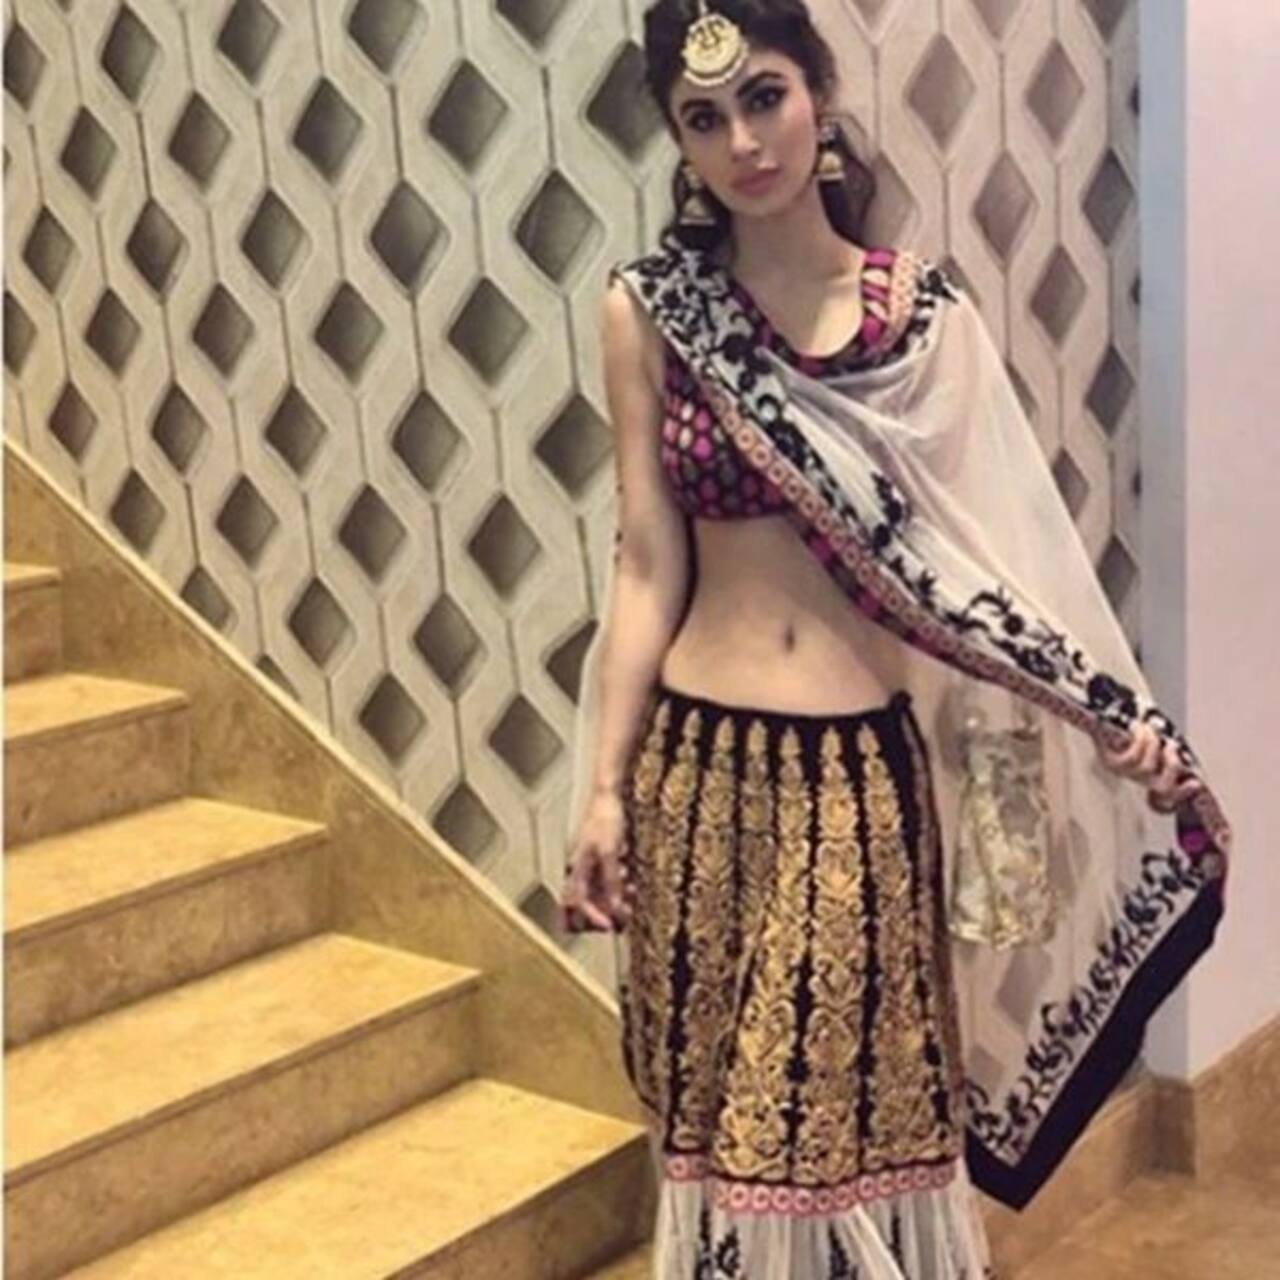 Mouni Roy for being skinny